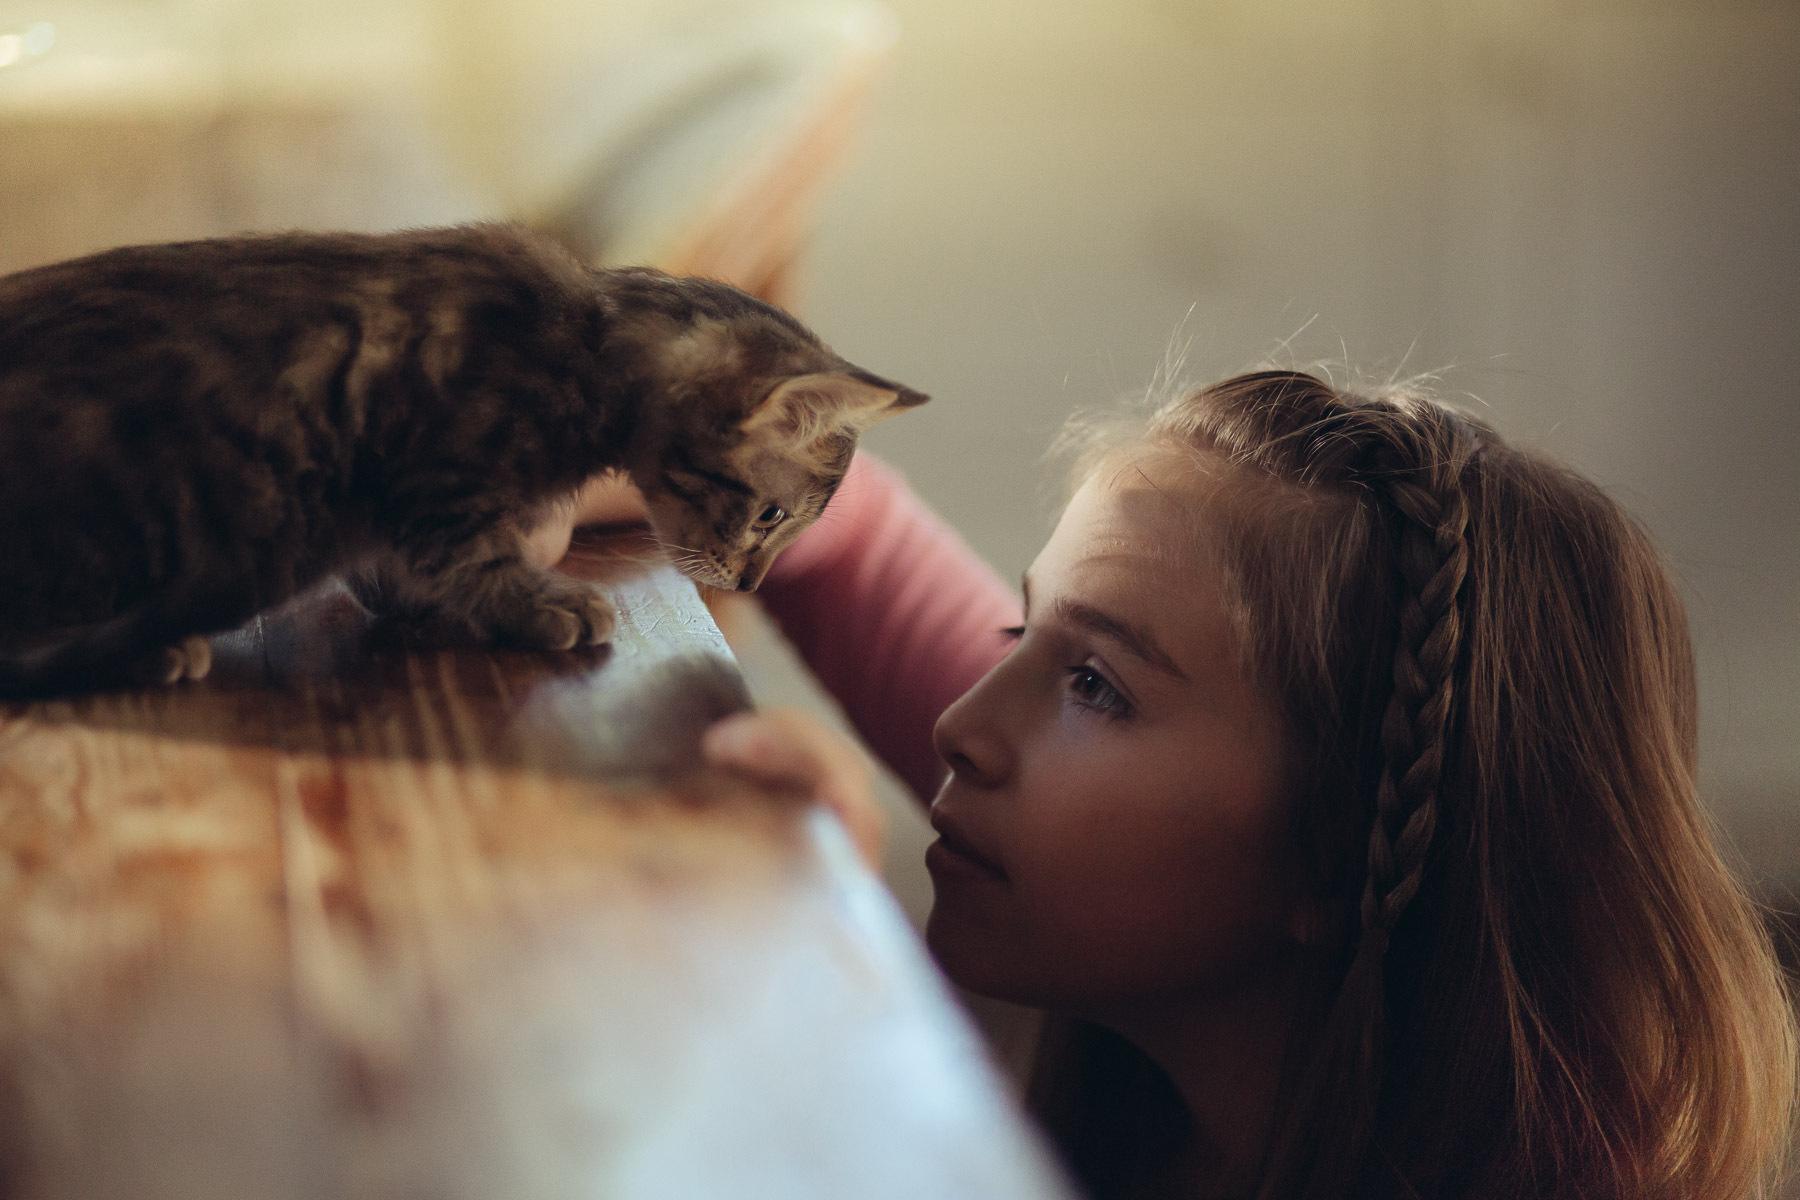 cat-photography-little-girl-with-cat-looking-at-each-other.jpg